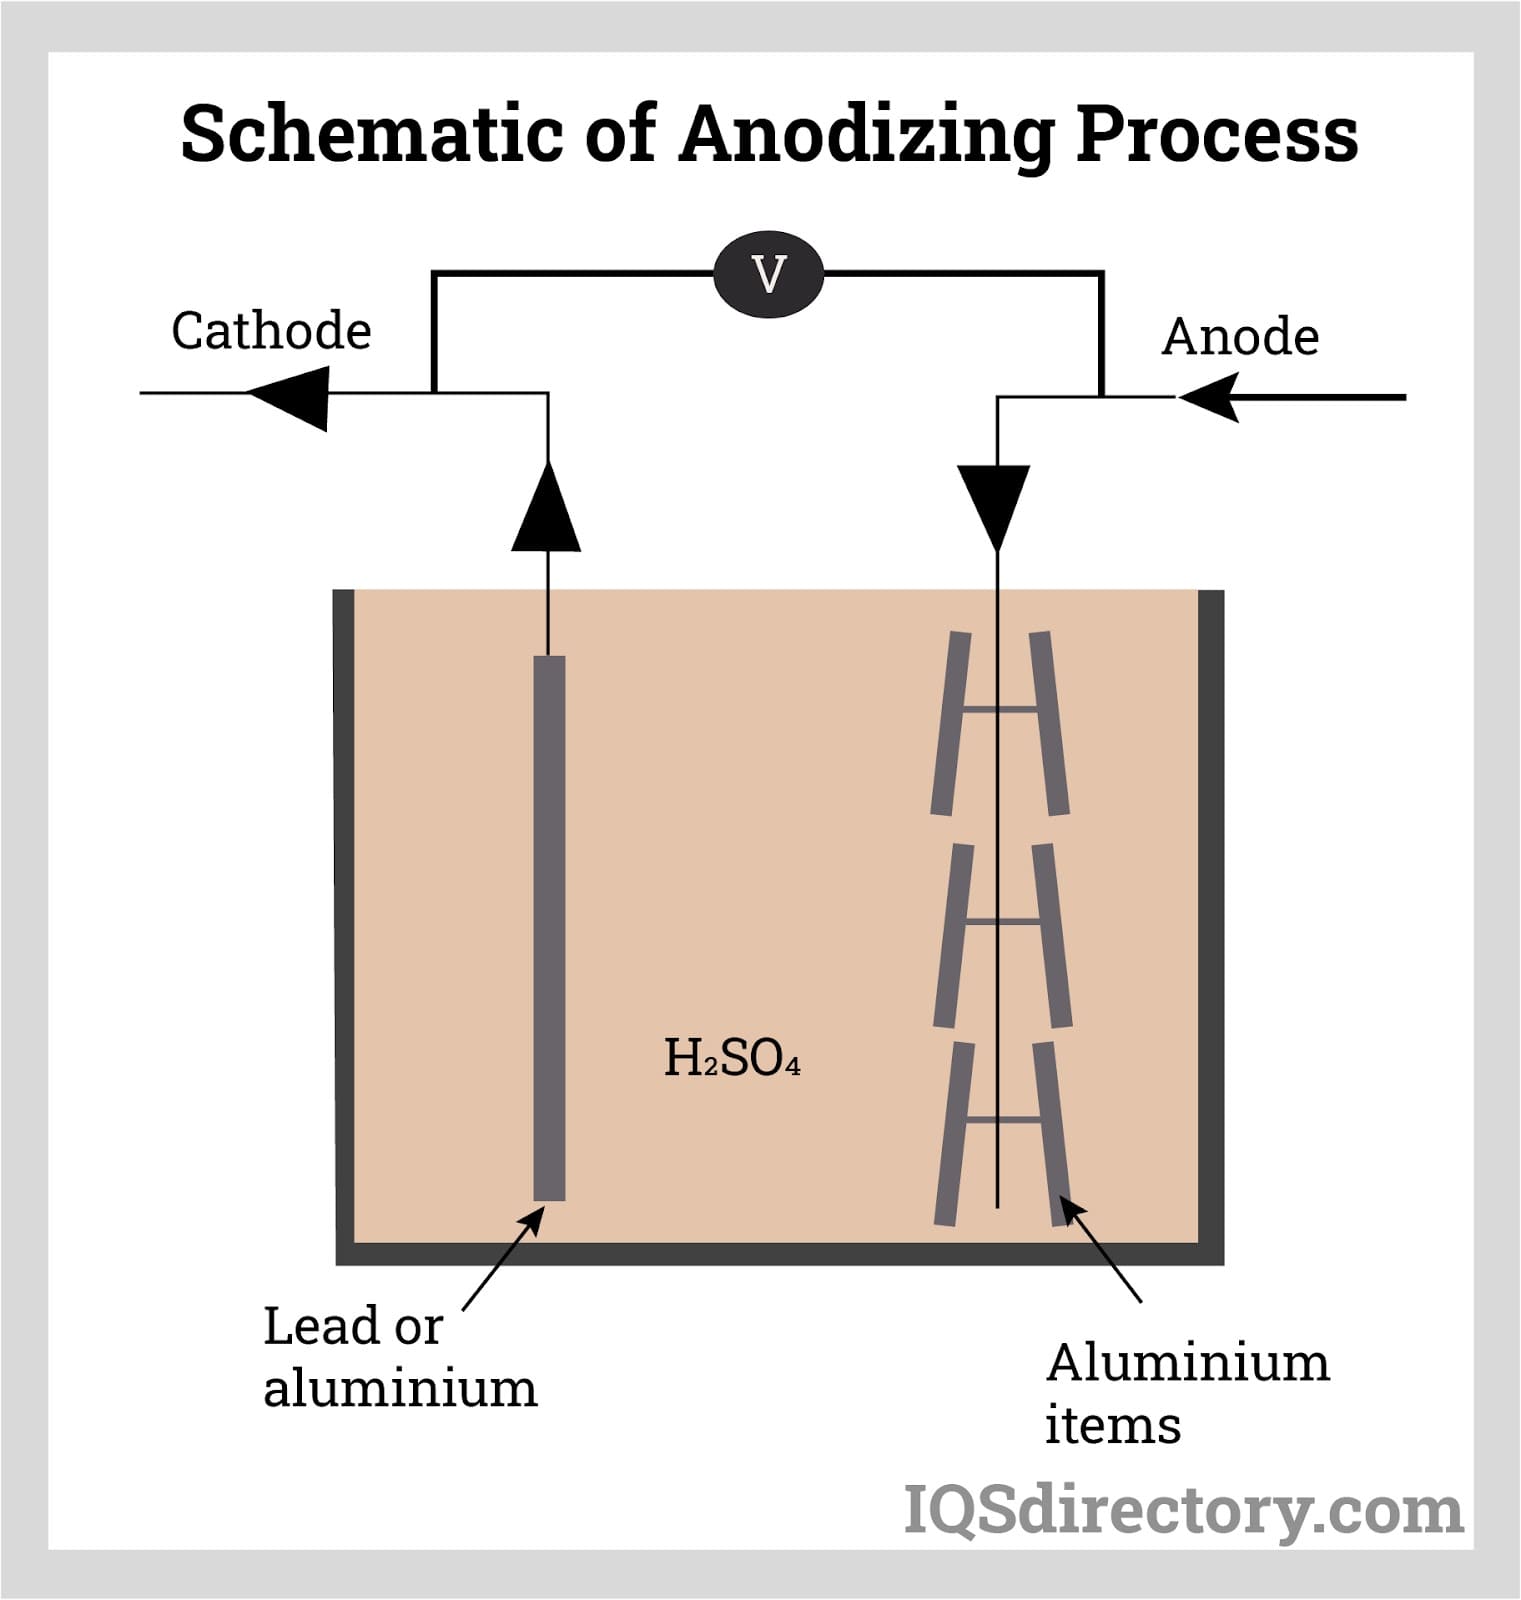 Schematic of Anodizing Process